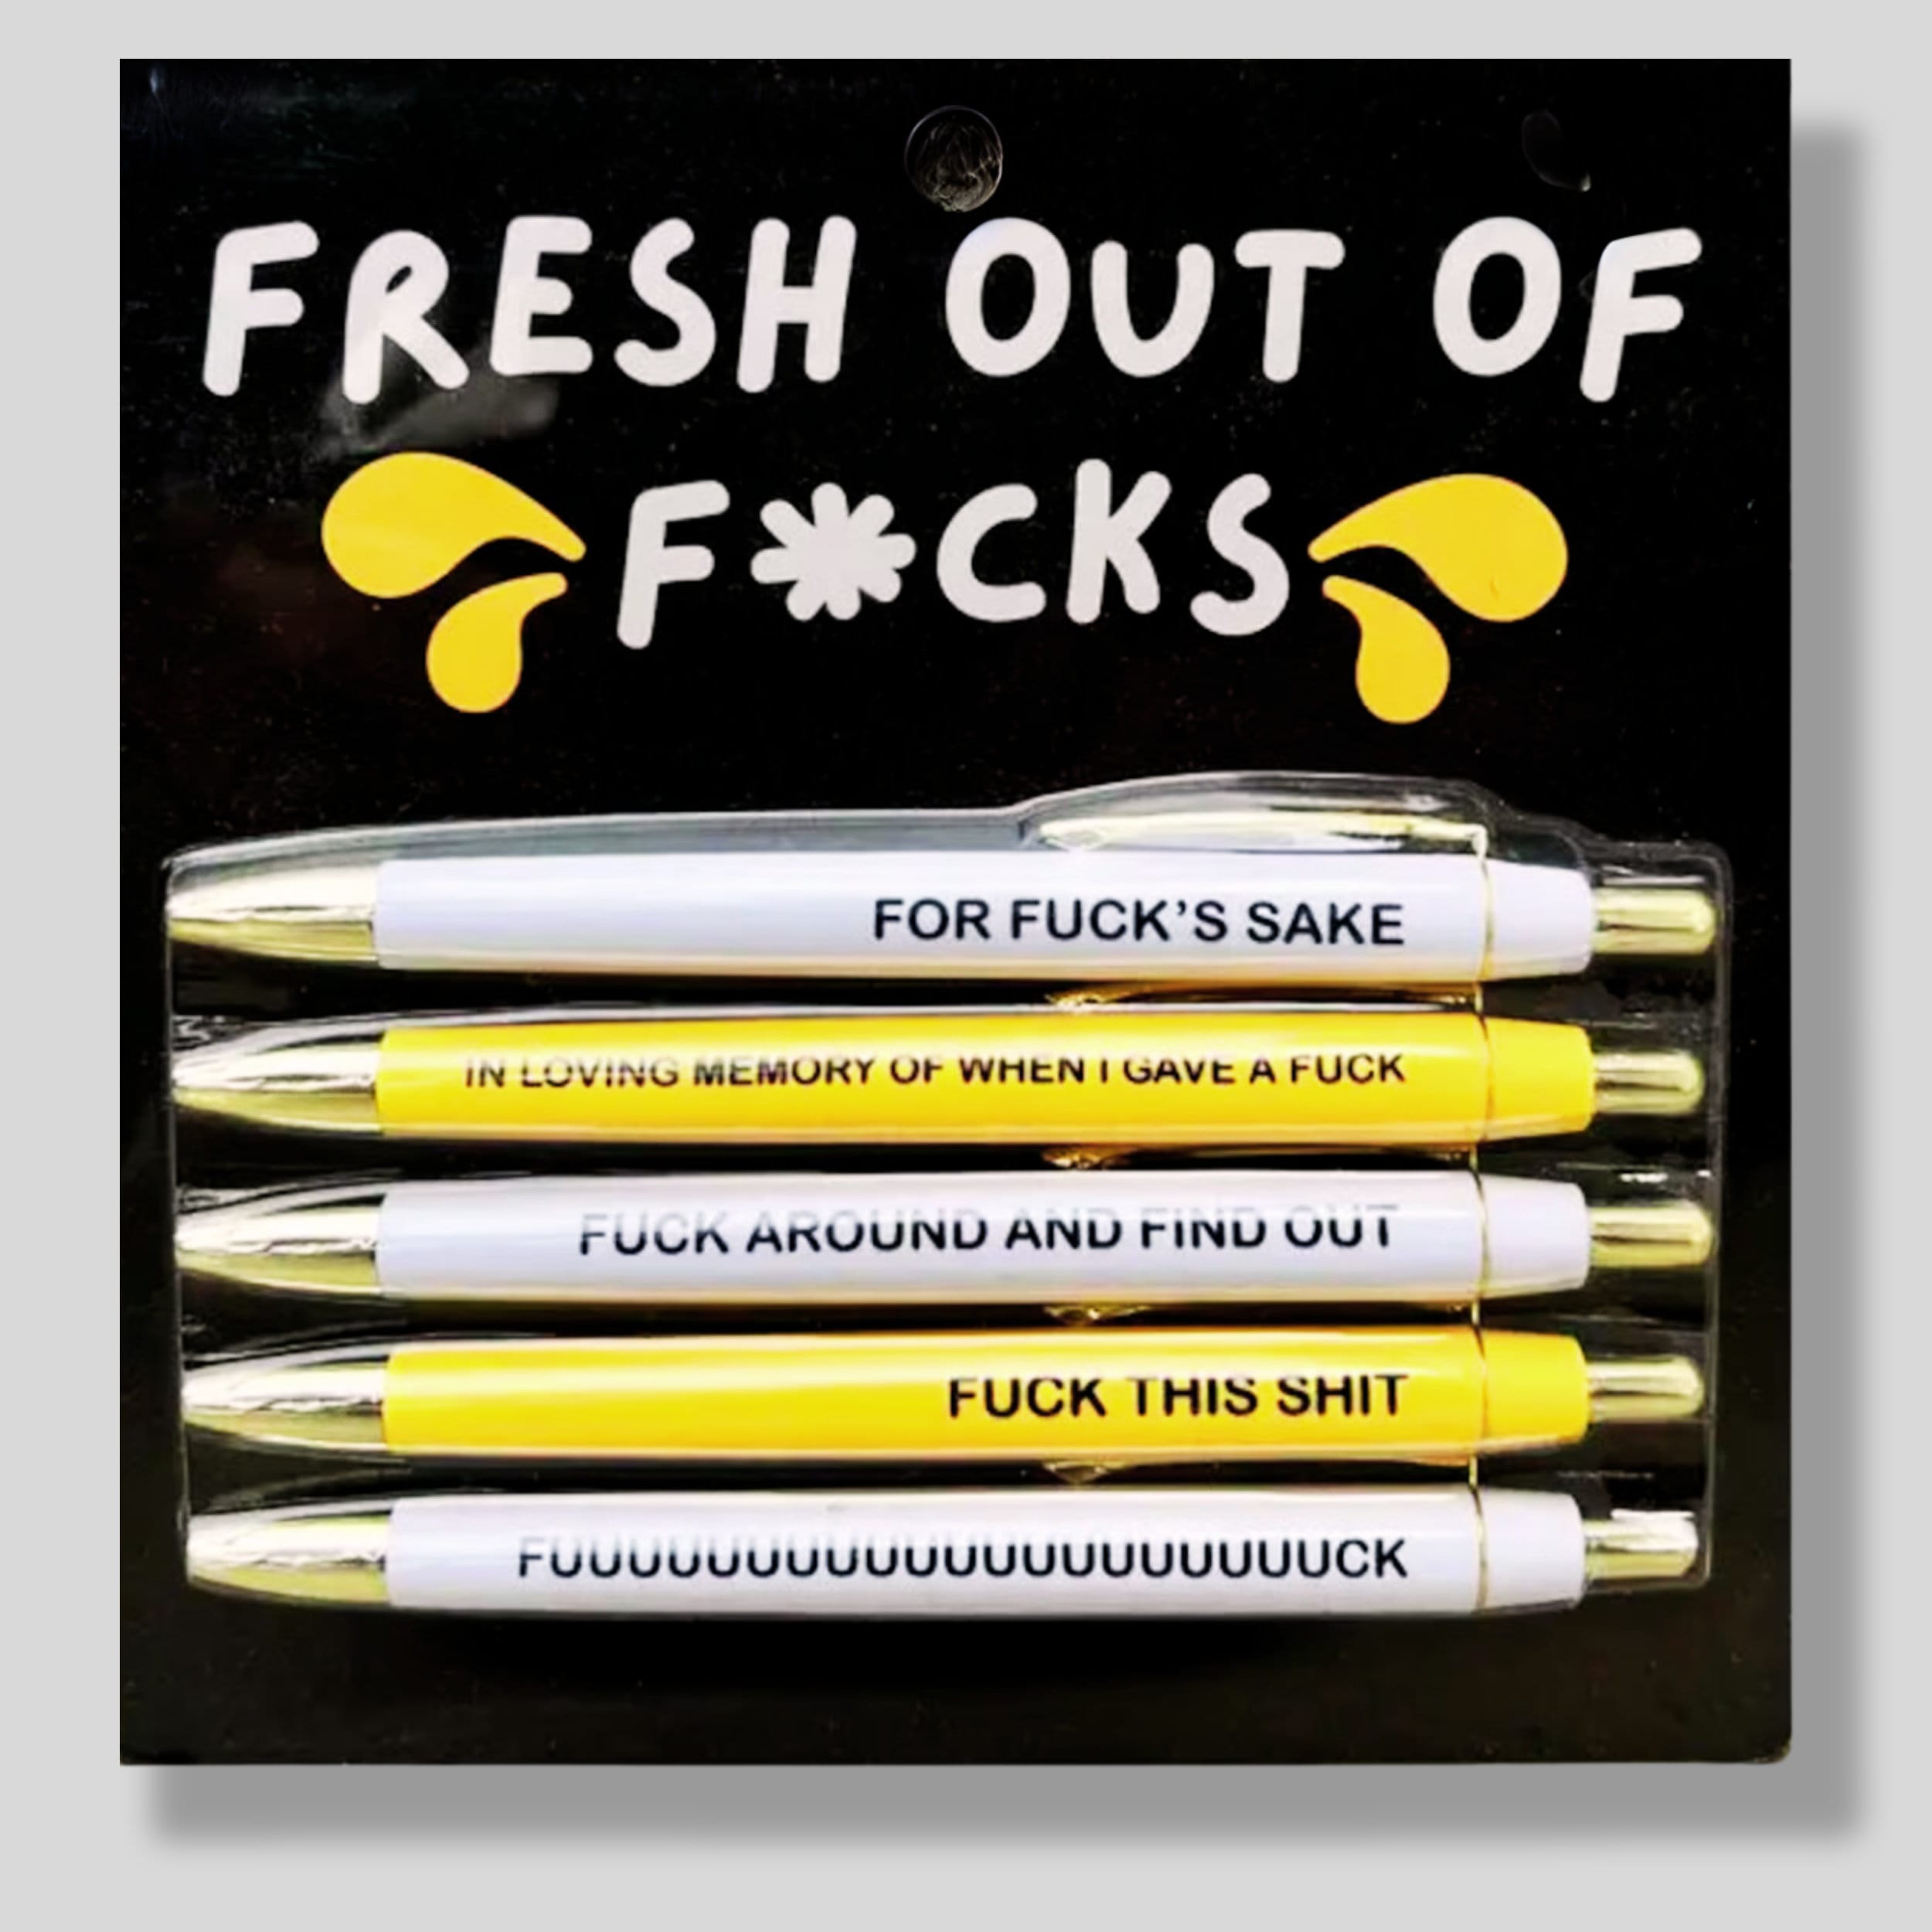 Fresh Outta Fucks Pad and Pen, Funny Pens, Snarky Novelty Fresh Outta Fucks Pen  Set, Funny Pad and Pen Office Supplies, Fun Desk Accessory Gifts for  Friends Co-Workers, Boss (Black 2Pcs) 